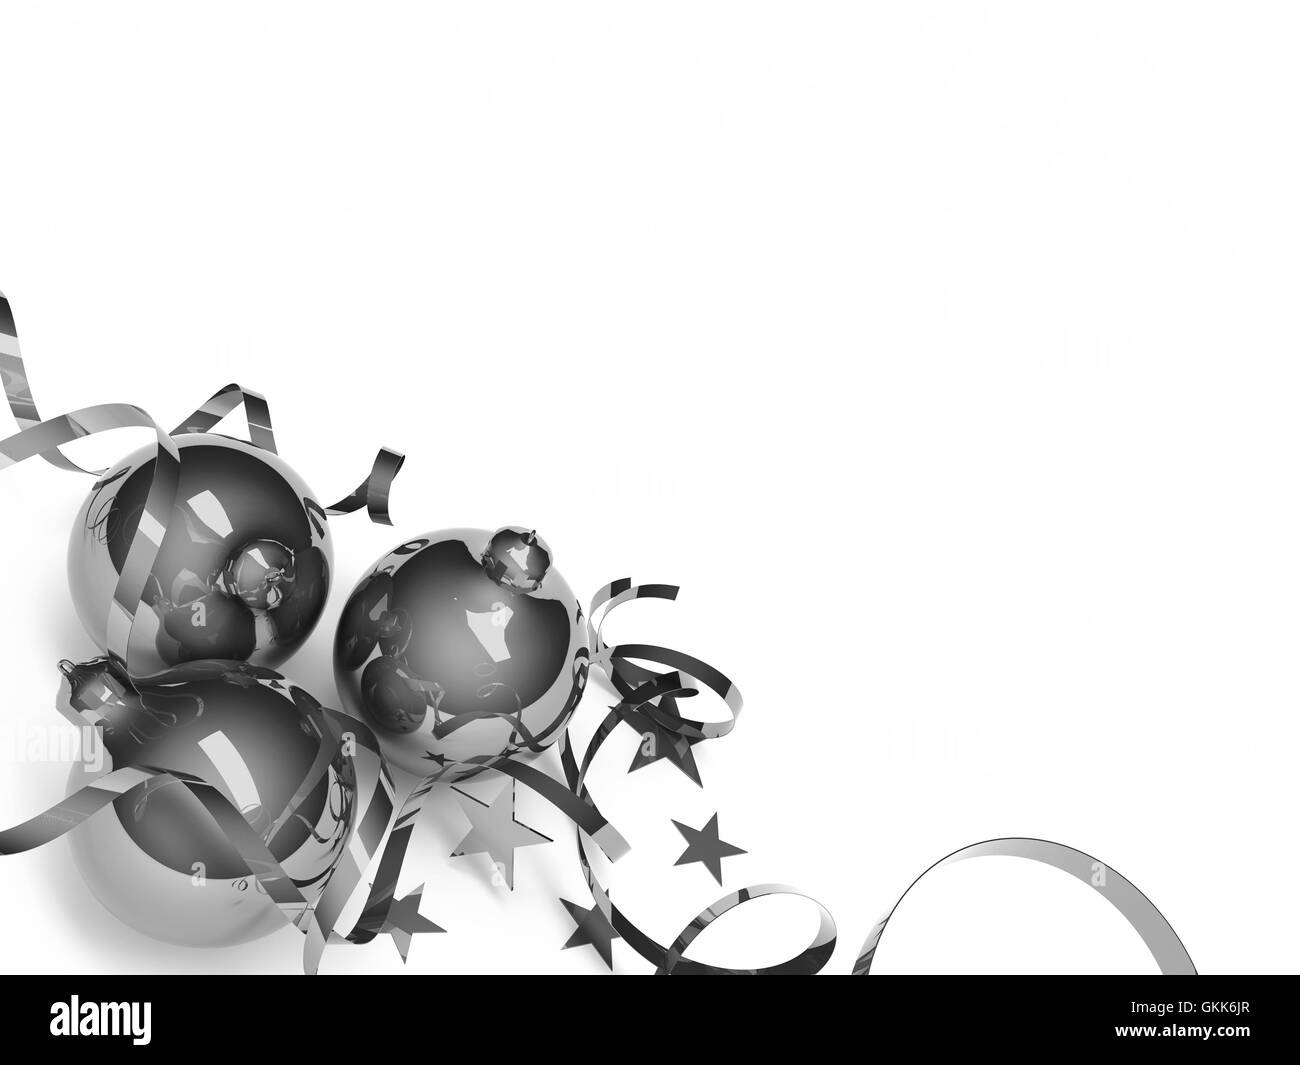 Three Christmas toys of silver color in the form of spheres on a white background Stock Photo